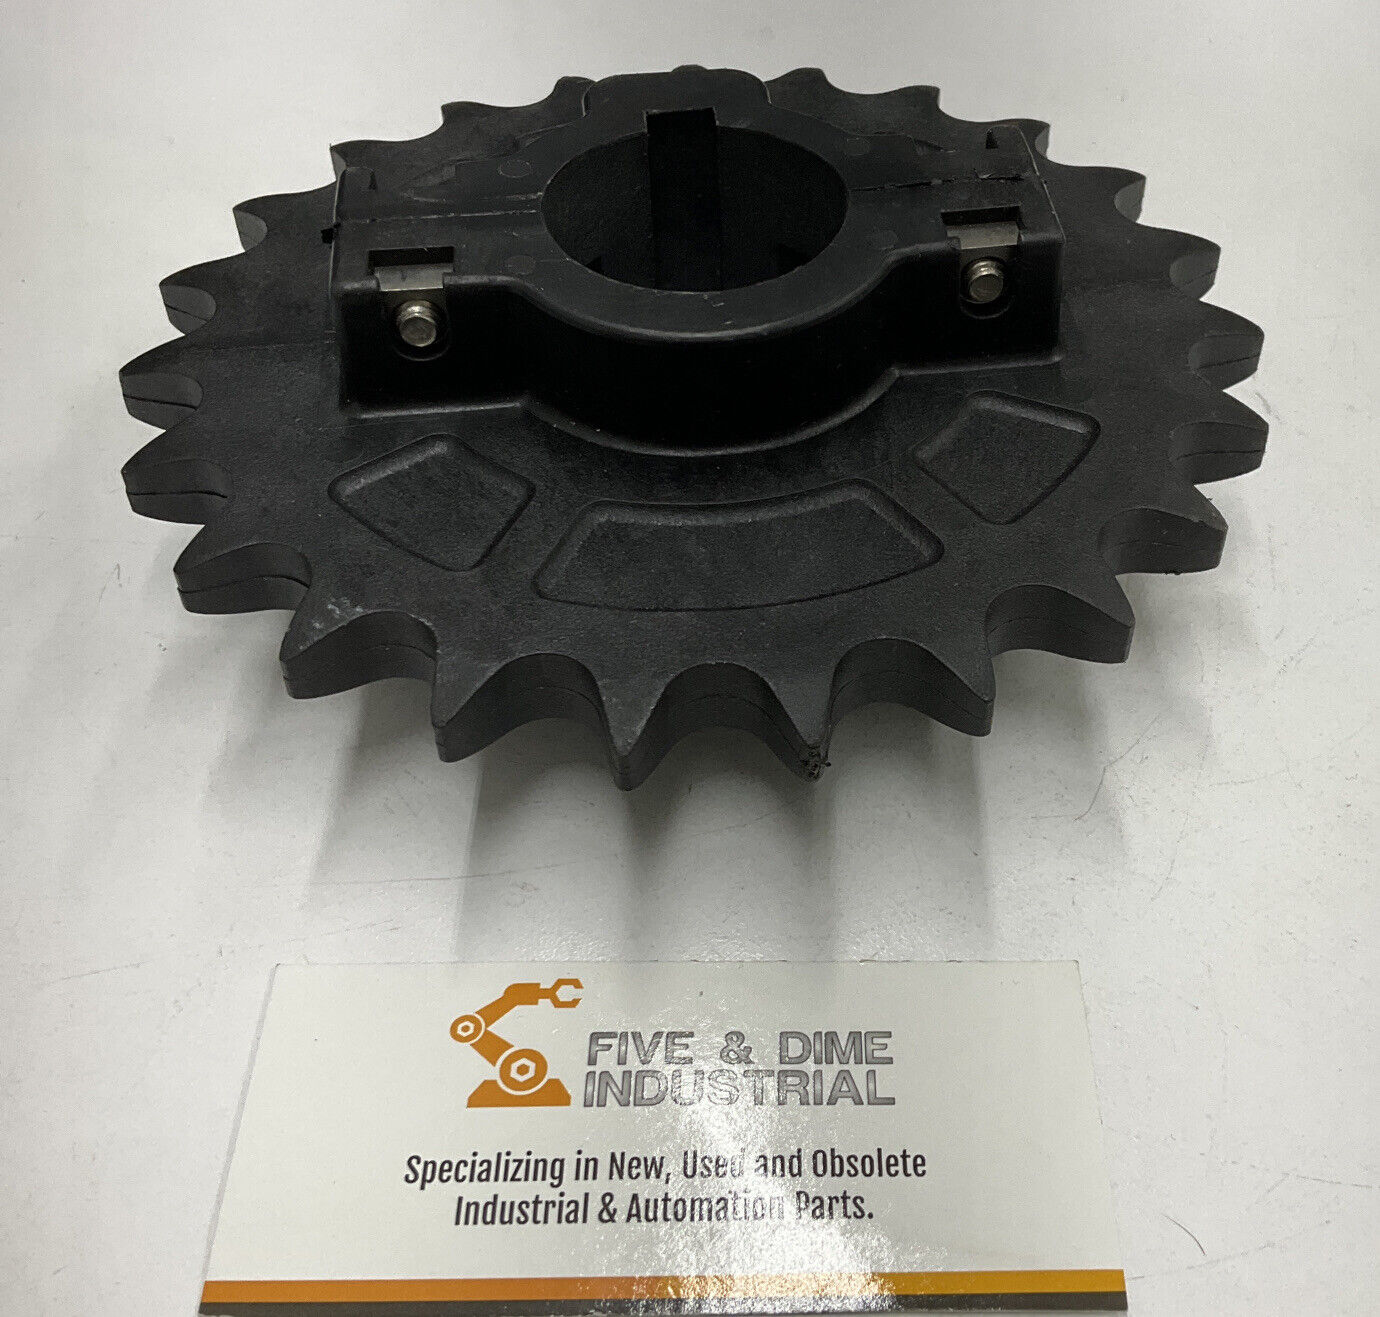 Rexnord 614-27 / 63-23T 2-Piece Sprocket 1-1/2" Bore (YE181)